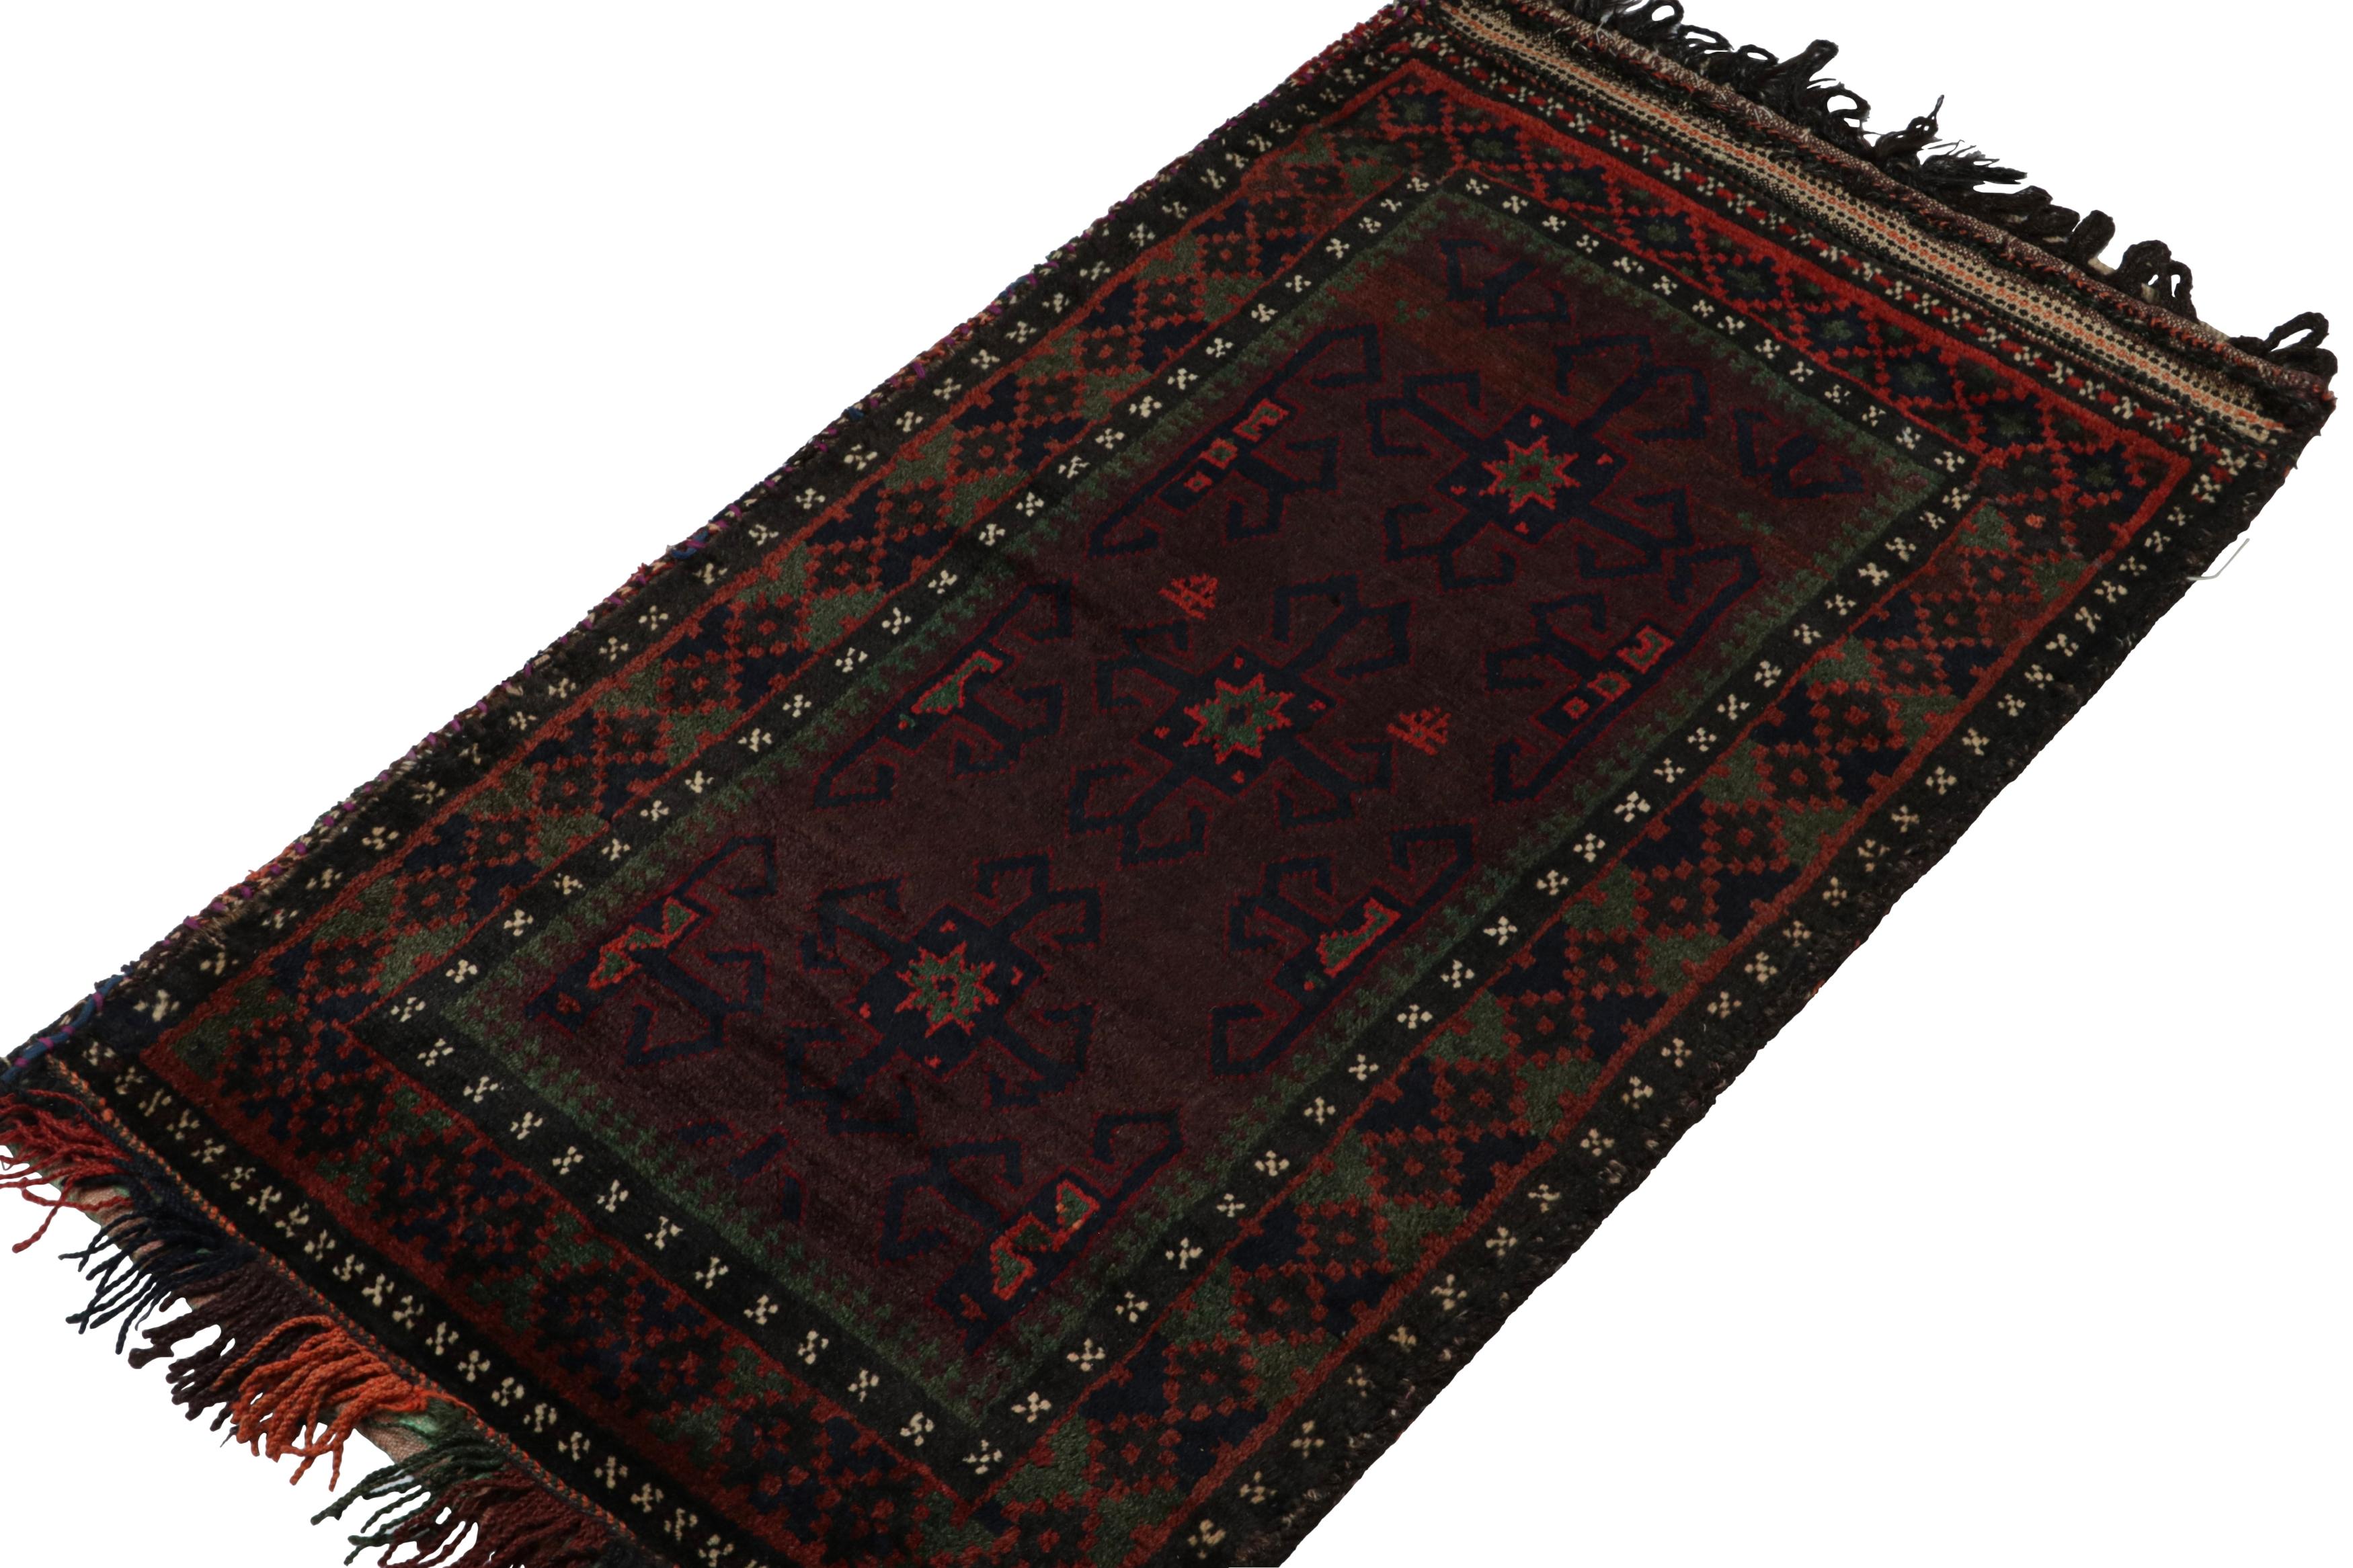 Hand-knotted in wool, this 2x4 Baluch Persian rug of the 1950s is the latest to enter Rug & Kilim’s Antique & Vintage collection.

On the Design:

The vintage Baluch rug carries tribal patterns in rich tones of red, green, blue & black. The field is